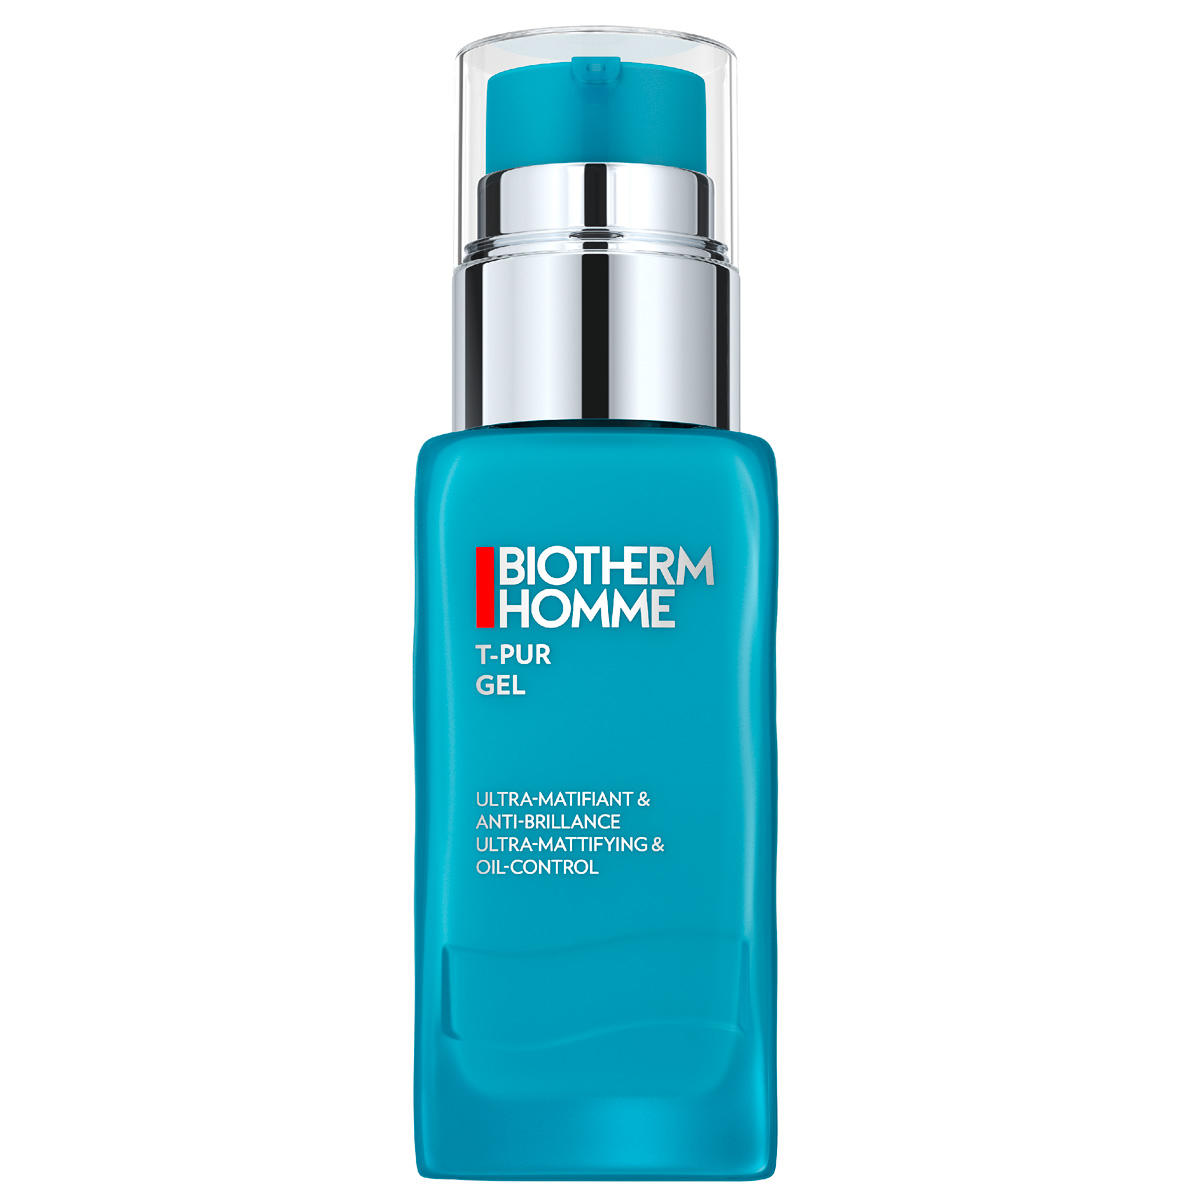 biotherm homme t-pur gel 50 ml